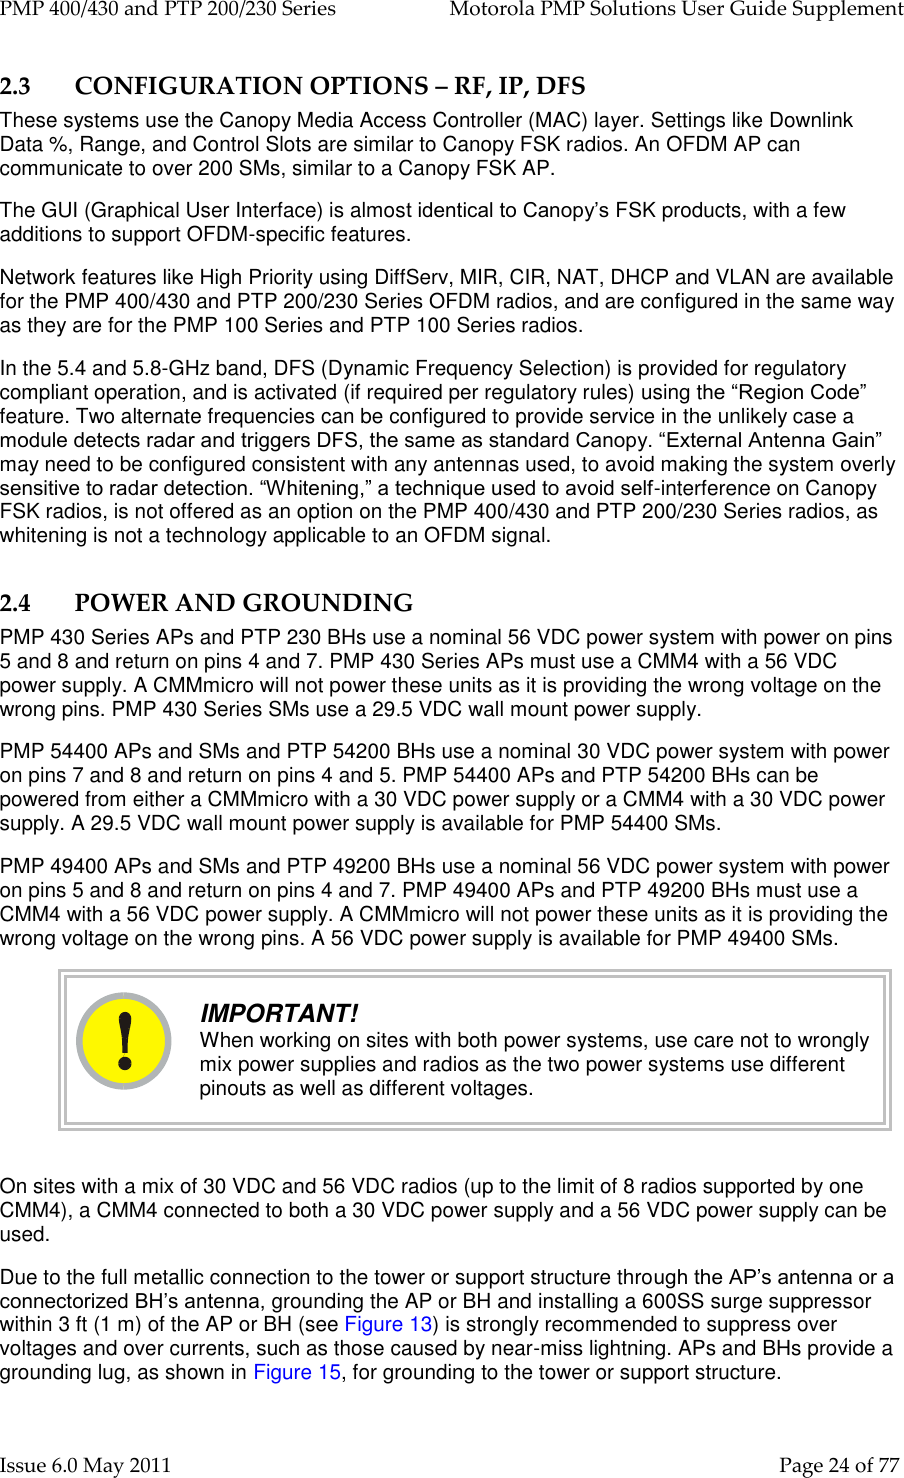 PMP 400/430 and PTP 200/230 Series   Motorola PMP Solutions User Guide Supplement Issue 6.0 May 2011    Page 24 of 77 2.3 CONFIGURATION OPTIONS – RF, IP, DFS These systems use the Canopy Media Access Controller (MAC) layer. Settings like Downlink Data %, Range, and Control Slots are similar to Canopy FSK radios. An OFDM AP can communicate to over 200 SMs, similar to a Canopy FSK AP. The GUI (Graphical User Interface) is almost identical to Canopy’s FSK products, with a few additions to support OFDM-specific features. Network features like High Priority using DiffServ, MIR, CIR, NAT, DHCP and VLAN are available for the PMP 400/430 and PTP 200/230 Series OFDM radios, and are configured in the same way as they are for the PMP 100 Series and PTP 100 Series radios. In the 5.4 and 5.8-GHz band, DFS (Dynamic Frequency Selection) is provided for regulatory compliant operation, and is activated (if required per regulatory rules) using the “Region Code” feature. Two alternate frequencies can be configured to provide service in the unlikely case a module detects radar and triggers DFS, the same as standard Canopy. “External Antenna Gain” may need to be configured consistent with any antennas used, to avoid making the system overly sensitive to radar detection. “Whitening,” a technique used to avoid self-interference on Canopy FSK radios, is not offered as an option on the PMP 400/430 and PTP 200/230 Series radios, as whitening is not a technology applicable to an OFDM signal. 2.4 POWER AND GROUNDING PMP 430 Series APs and PTP 230 BHs use a nominal 56 VDC power system with power on pins 5 and 8 and return on pins 4 and 7. PMP 430 Series APs must use a CMM4 with a 56 VDC power supply. A CMMmicro will not power these units as it is providing the wrong voltage on the wrong pins. PMP 430 Series SMs use a 29.5 VDC wall mount power supply. PMP 54400 APs and SMs and PTP 54200 BHs use a nominal 30 VDC power system with power on pins 7 and 8 and return on pins 4 and 5. PMP 54400 APs and PTP 54200 BHs can be powered from either a CMMmicro with a 30 VDC power supply or a CMM4 with a 30 VDC power supply. A 29.5 VDC wall mount power supply is available for PMP 54400 SMs. PMP 49400 APs and SMs and PTP 49200 BHs use a nominal 56 VDC power system with power on pins 5 and 8 and return on pins 4 and 7. PMP 49400 APs and PTP 49200 BHs must use a CMM4 with a 56 VDC power supply. A CMMmicro will not power these units as it is providing the wrong voltage on the wrong pins. A 56 VDC power supply is available for PMP 49400 SMs.  IMPORTANT! When working on sites with both power systems, use care not to wrongly mix power supplies and radios as the two power systems use different pinouts as well as different voltages.  On sites with a mix of 30 VDC and 56 VDC radios (up to the limit of 8 radios supported by one CMM4), a CMM4 connected to both a 30 VDC power supply and a 56 VDC power supply can be used. Due to the full metallic connection to the tower or support structure through the AP’s antenna or a connectorized BH’s antenna, grounding the AP or BH and installing a 600SS surge suppressor within 3 ft (1 m) of the AP or BH (see Figure 13) is strongly recommended to suppress over voltages and over currents, such as those caused by near-miss lightning. APs and BHs provide a grounding lug, as shown in Figure 15, for grounding to the tower or support structure.  